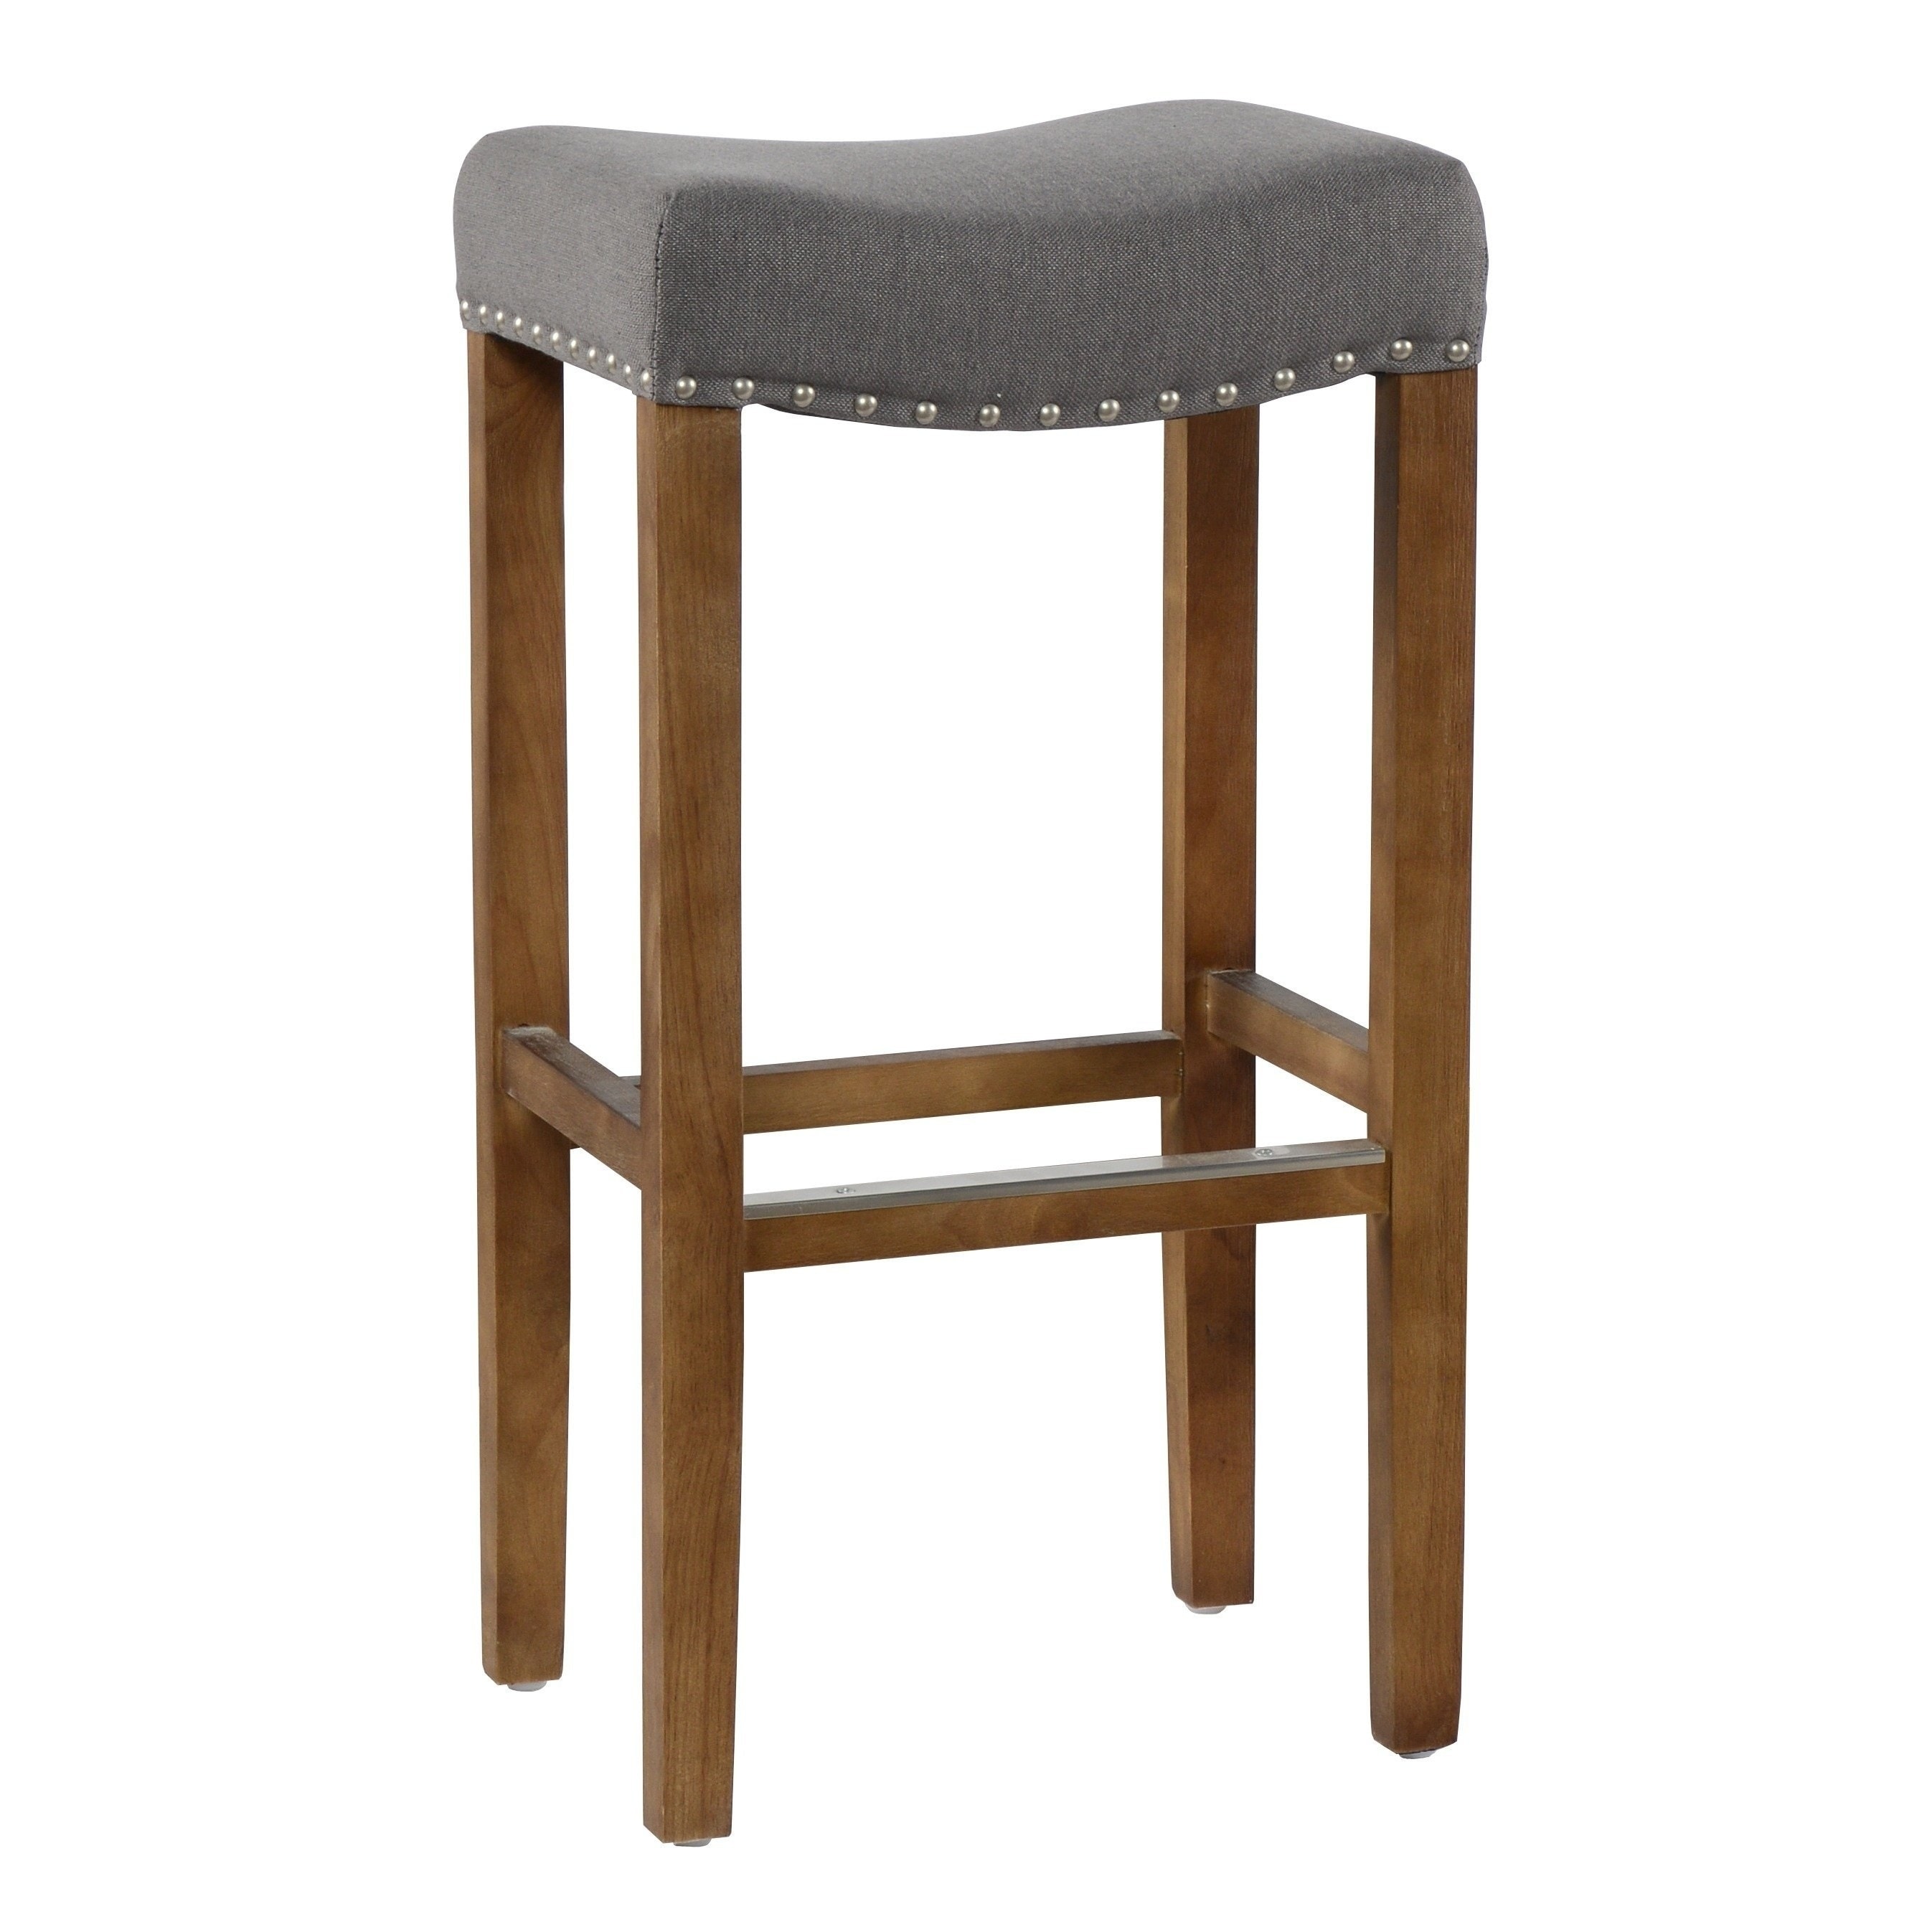 Optima Backless Bar Stool (Grey color Upholstery materials 28 percent linen, 18 percent polyester, 54 percent rayon Seat height 31 inches Seat dimensions 16 inches wide x 12 inches deep Dimensions 31 inches high x 16 inches wide x 12 inches deep Note